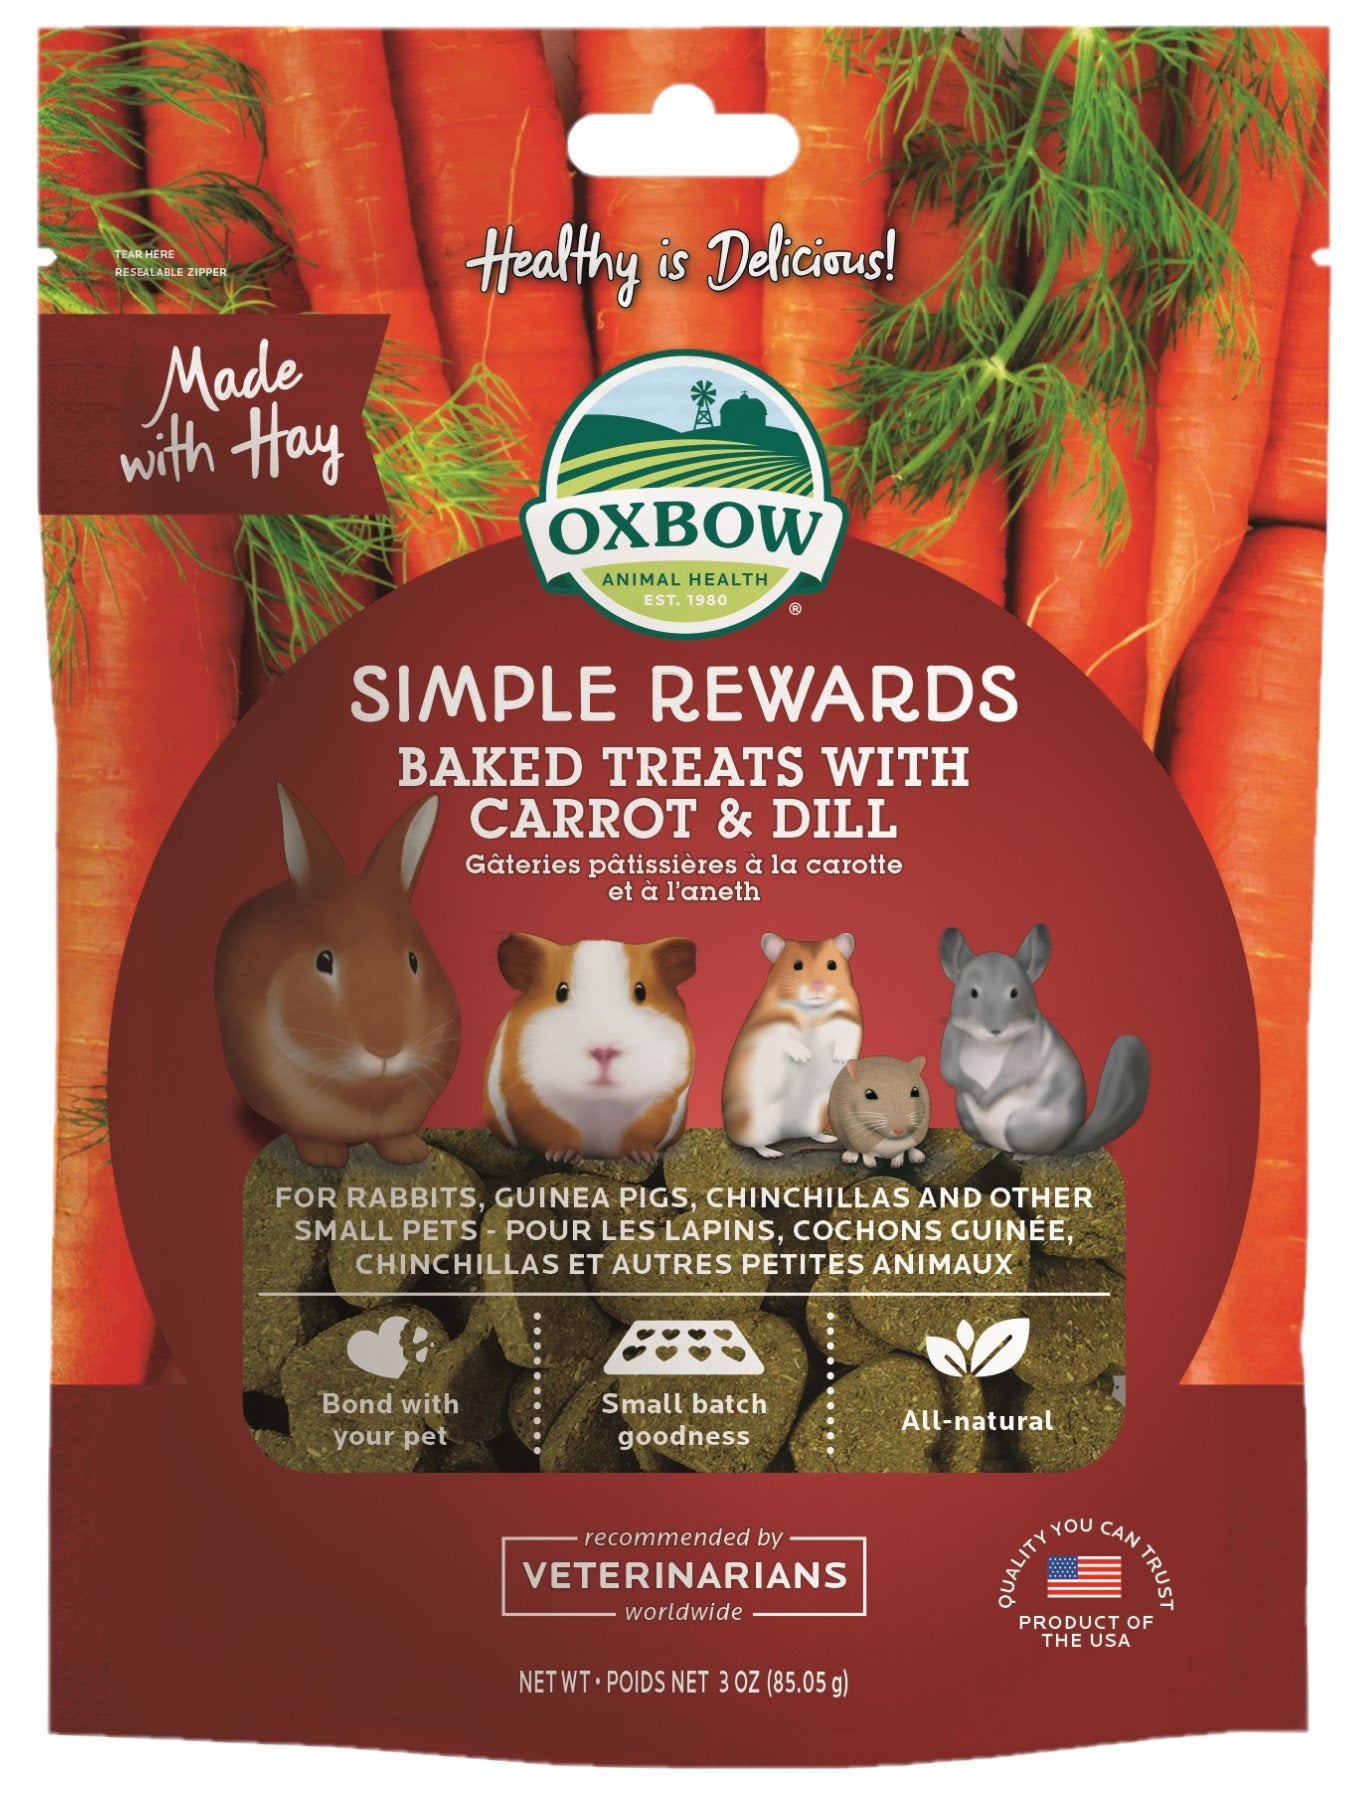 Oxbow Simple Rewards Carrot & Dill 85g - RSPCA VIC